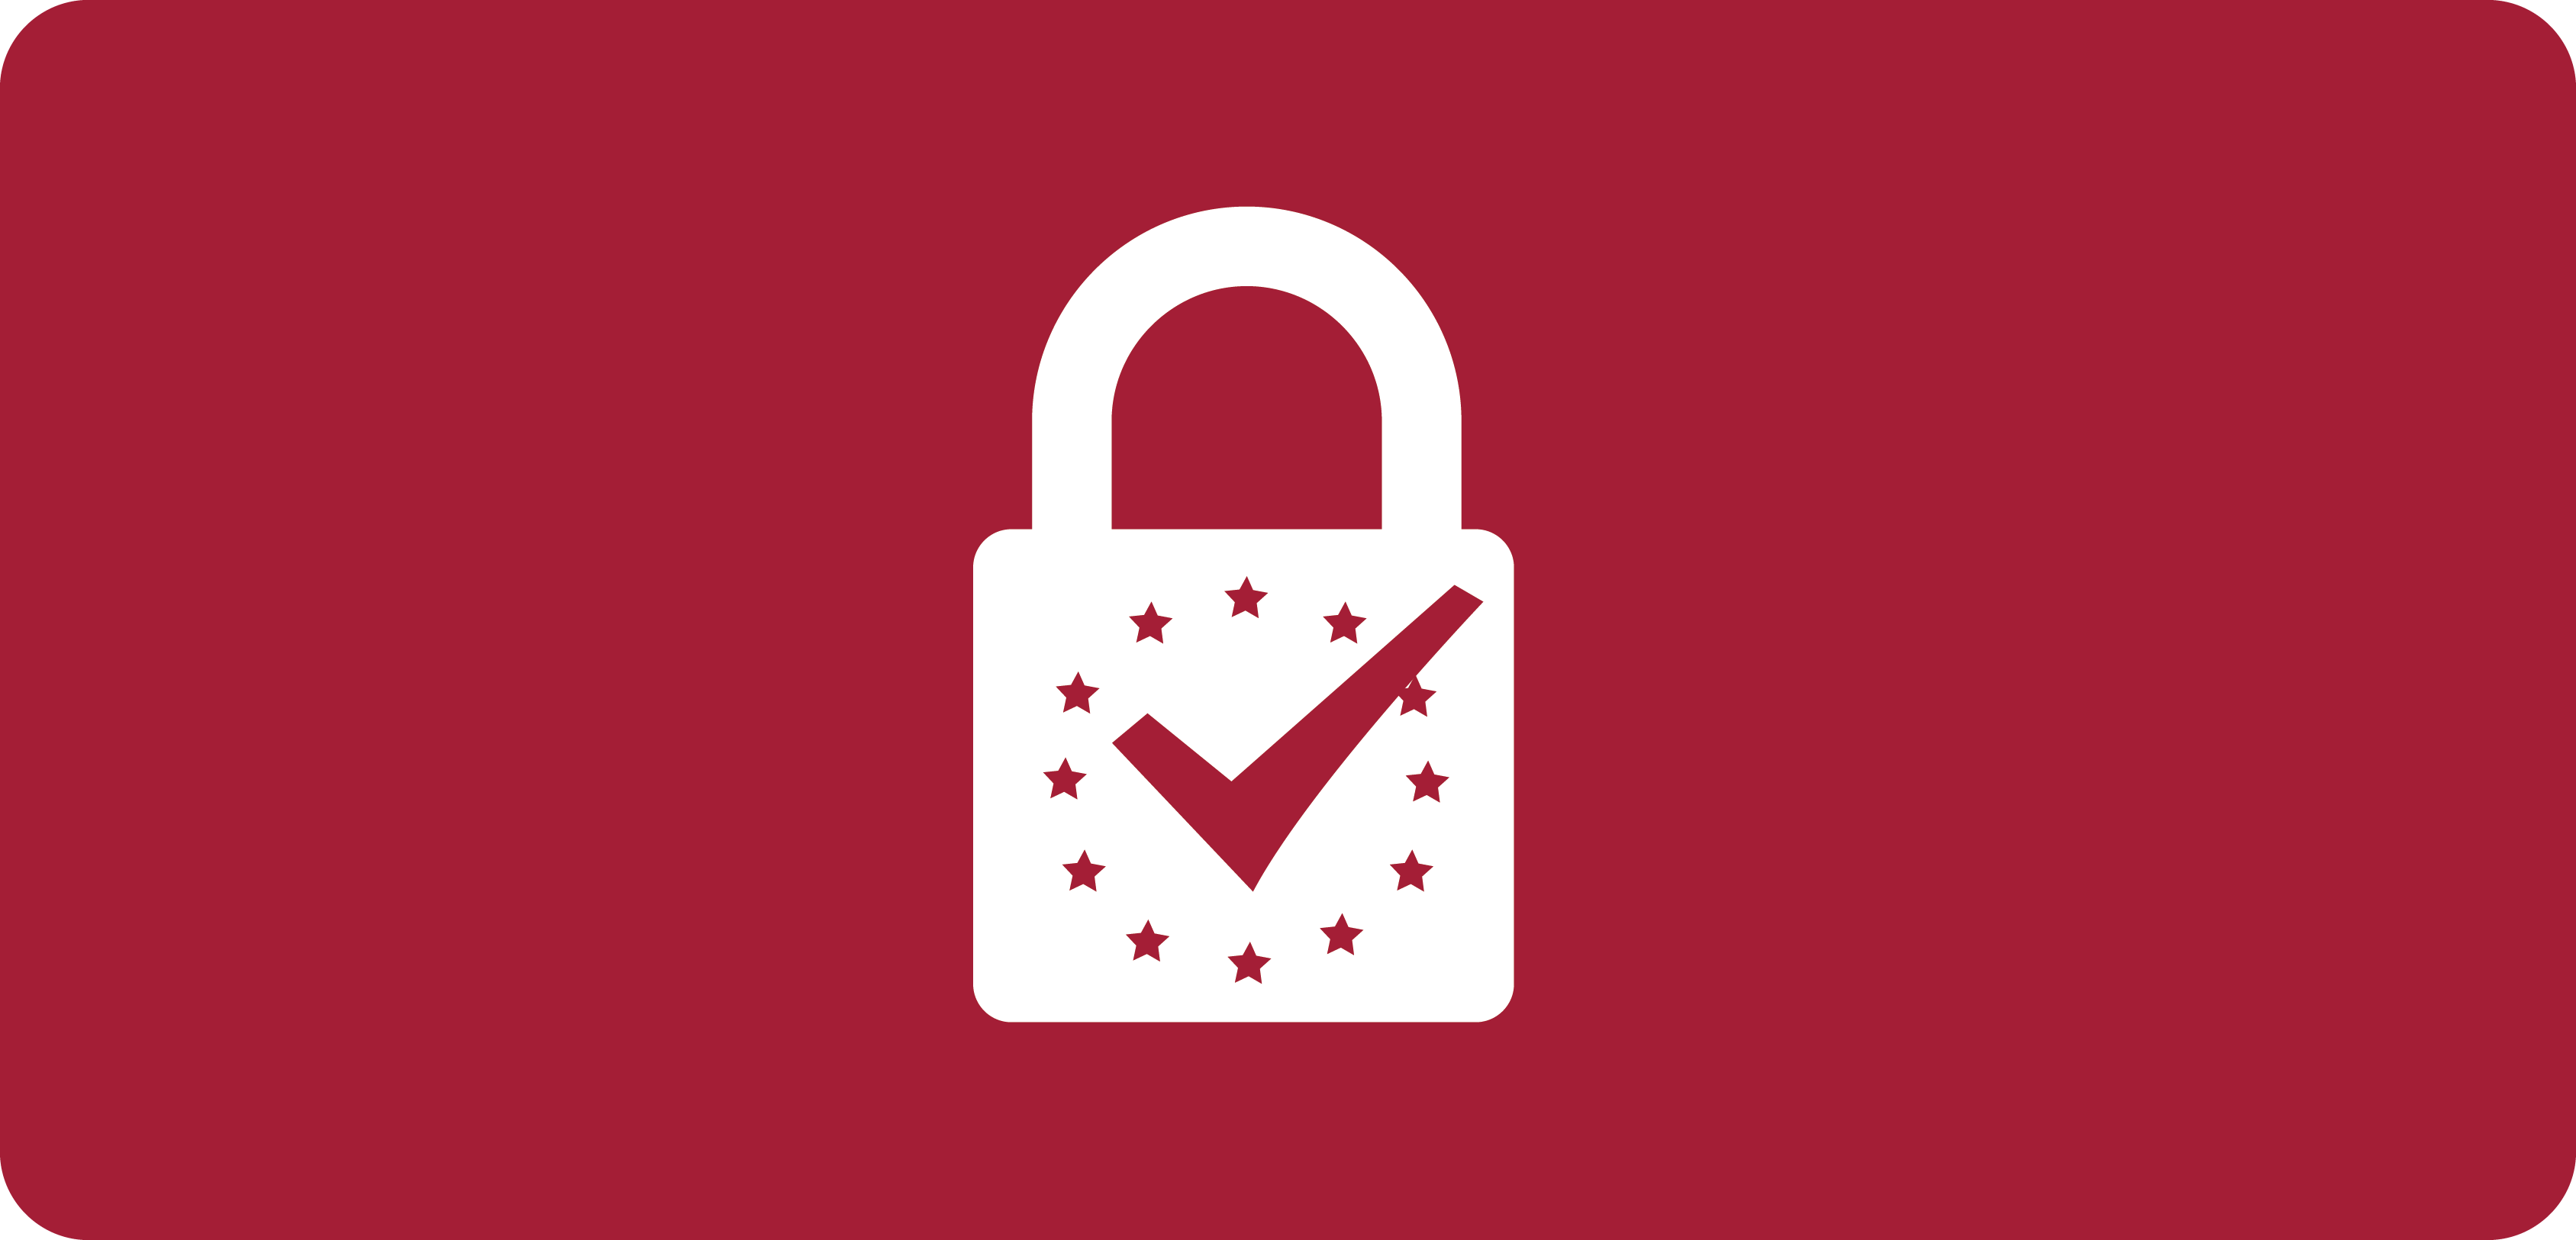 White padlock icon on red background